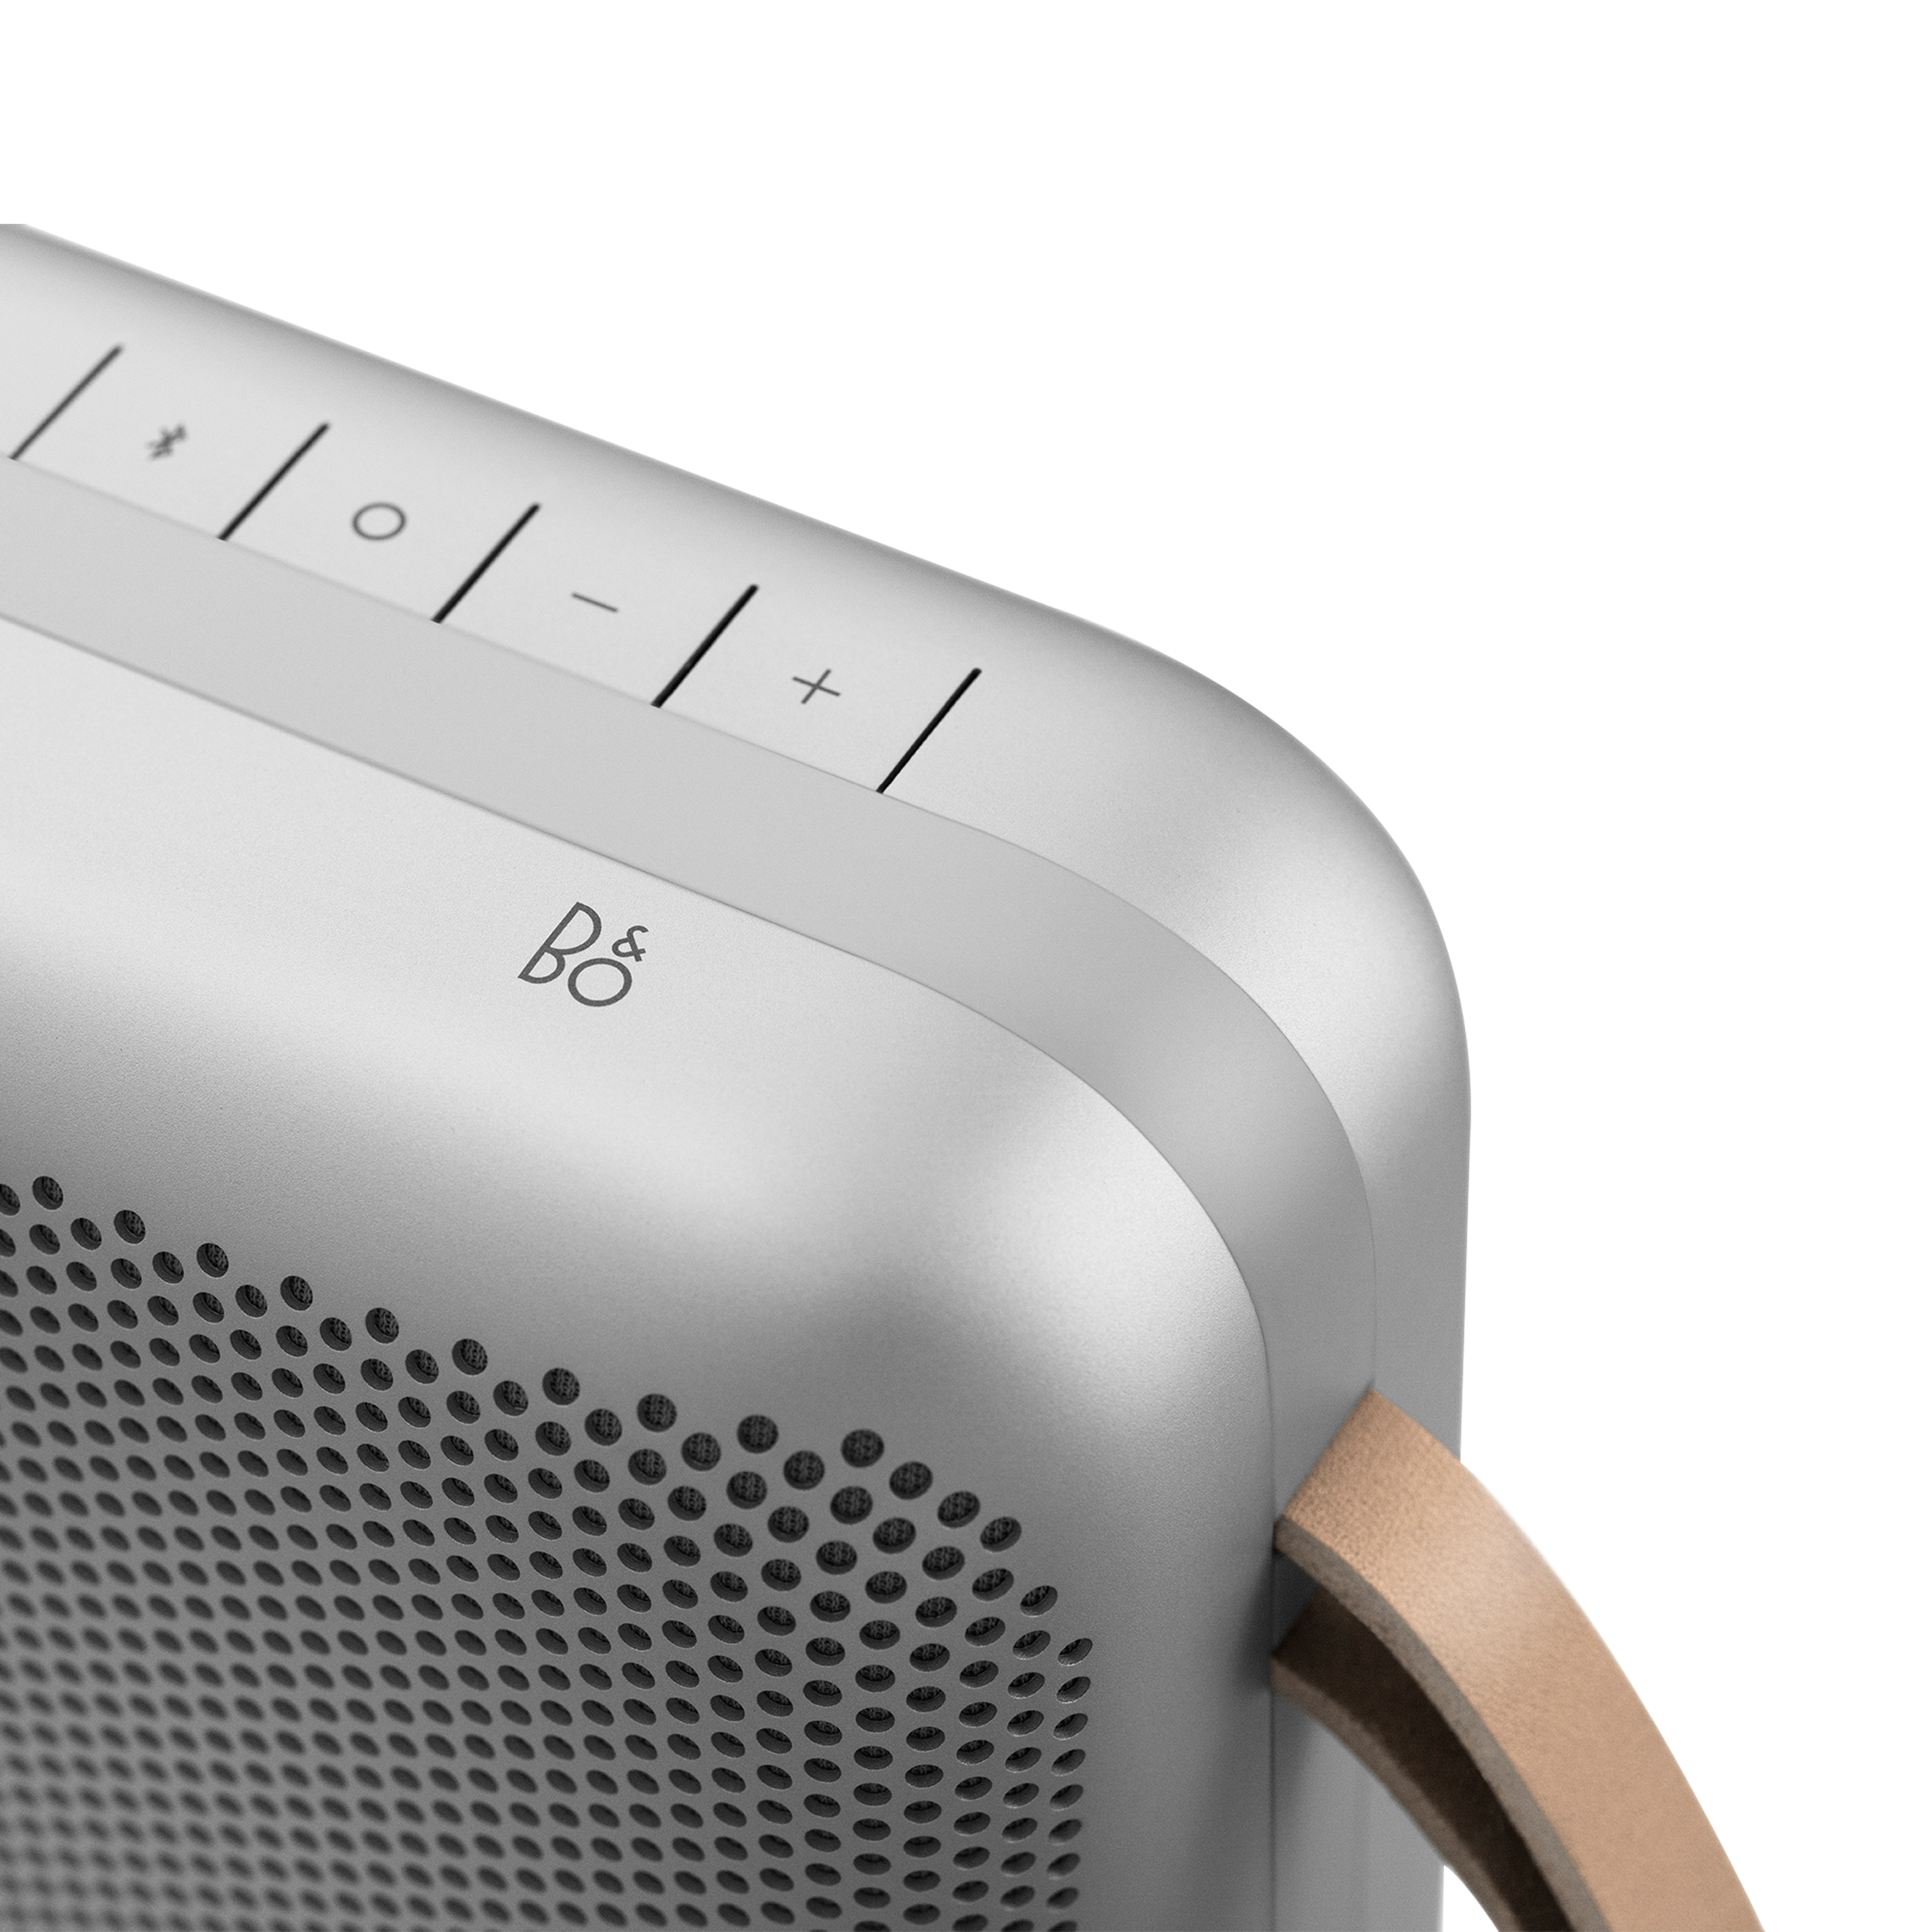 Beoplay P6 - Portable speaker in compact design | B&O